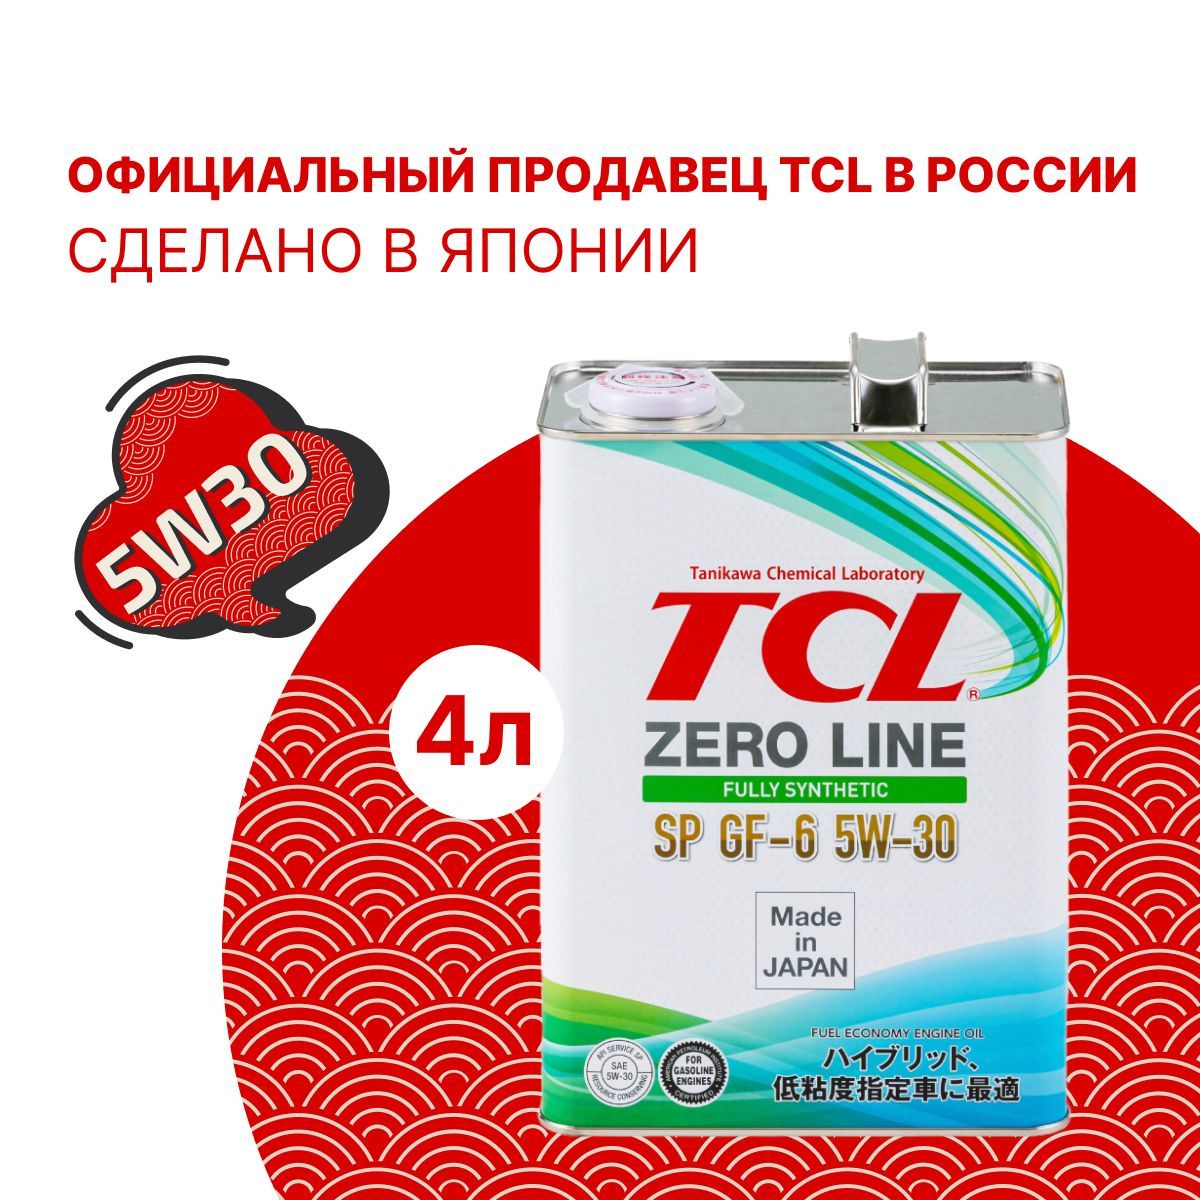 Моторное масло tcl 5w30. TCL 5 30. TCL 5w30. TCL масло моторное 5w-30. TCL 5w30 gf-6.